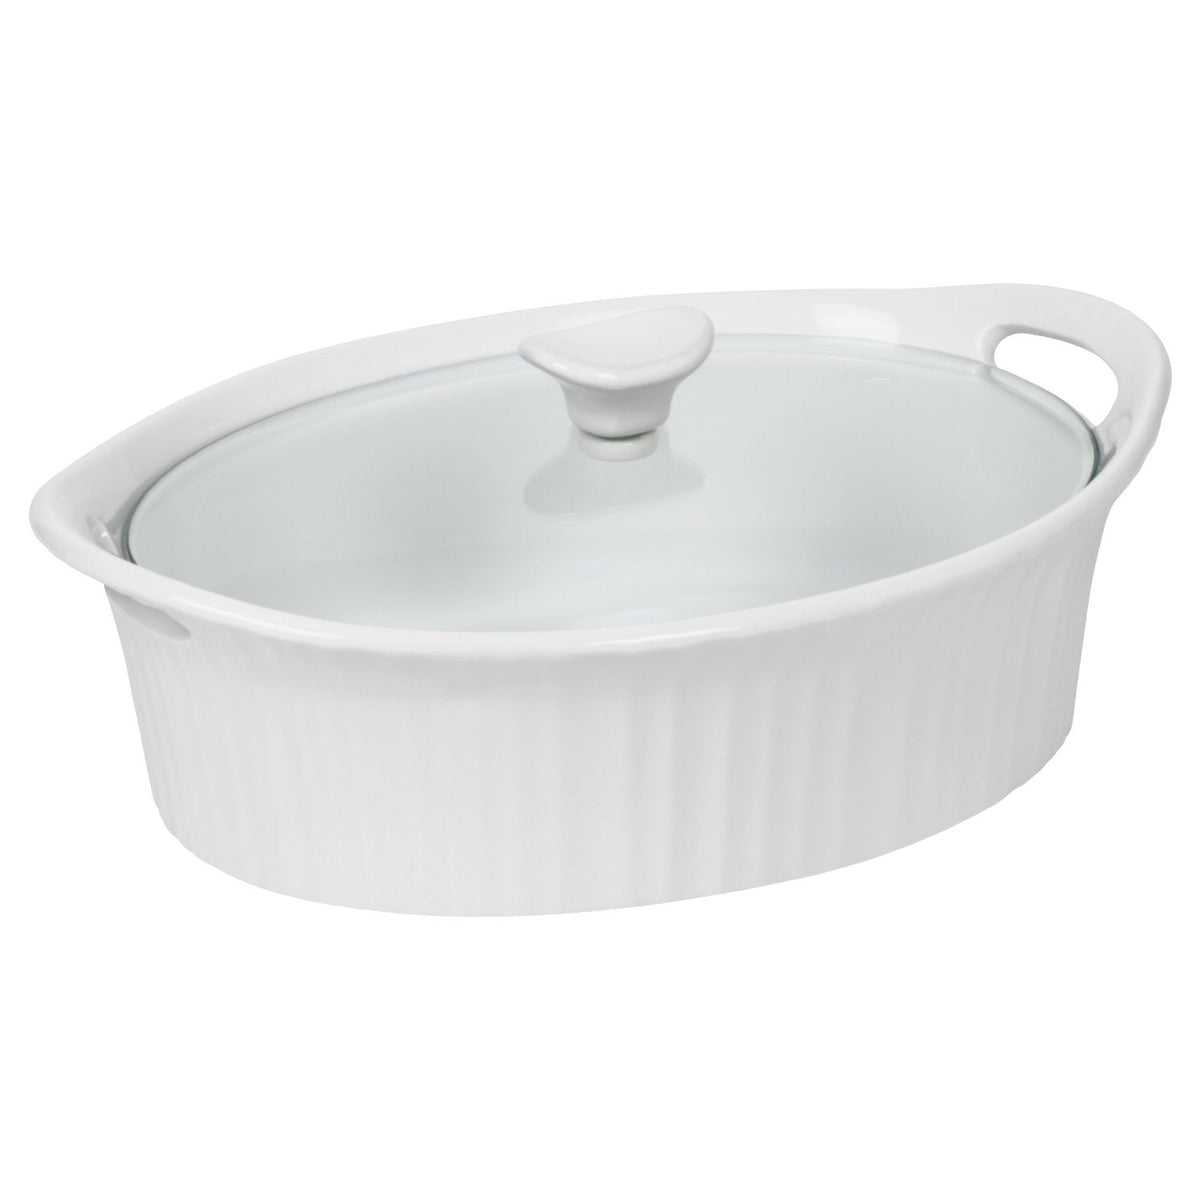 Corningware 1105935 French White Oval Casserole with Glass Cover, 2.5 Qt